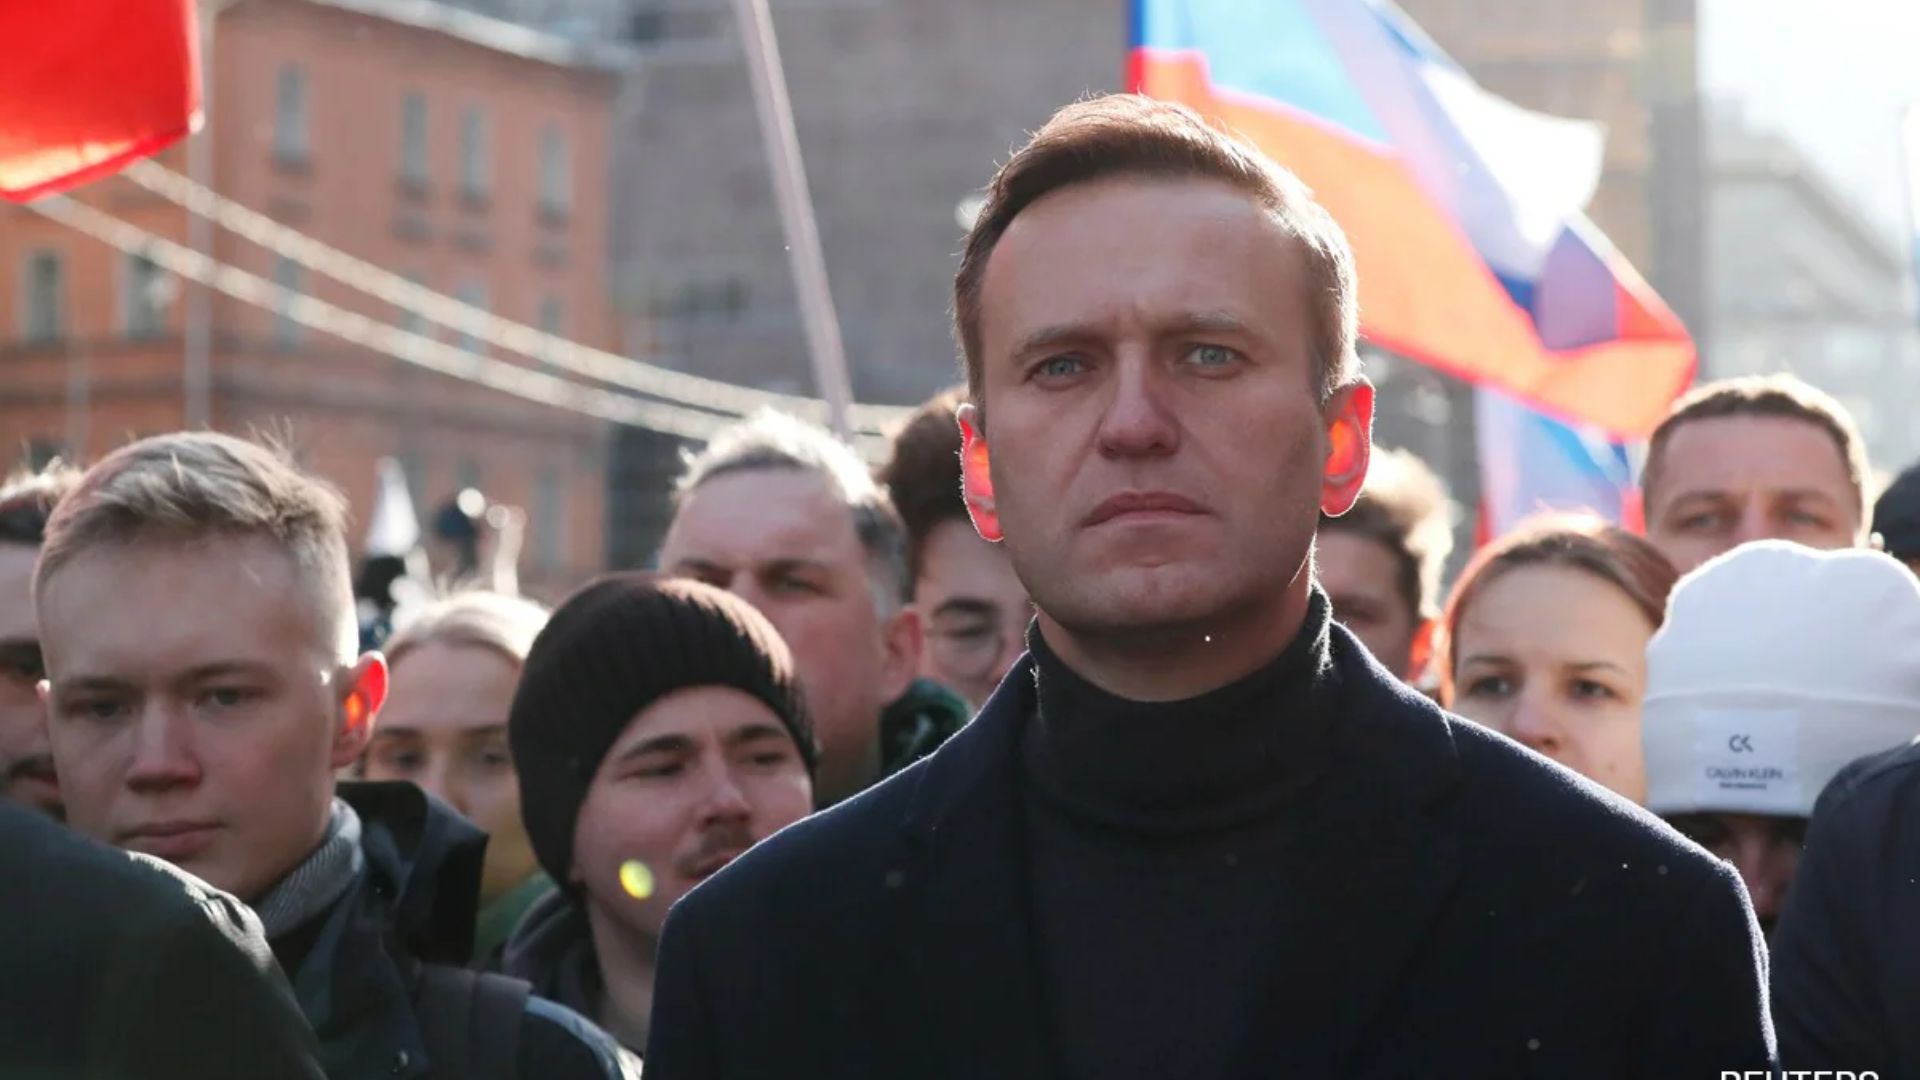 Russian Opposition Leader and Putin Critic Alexei Navalny Dies in Prison